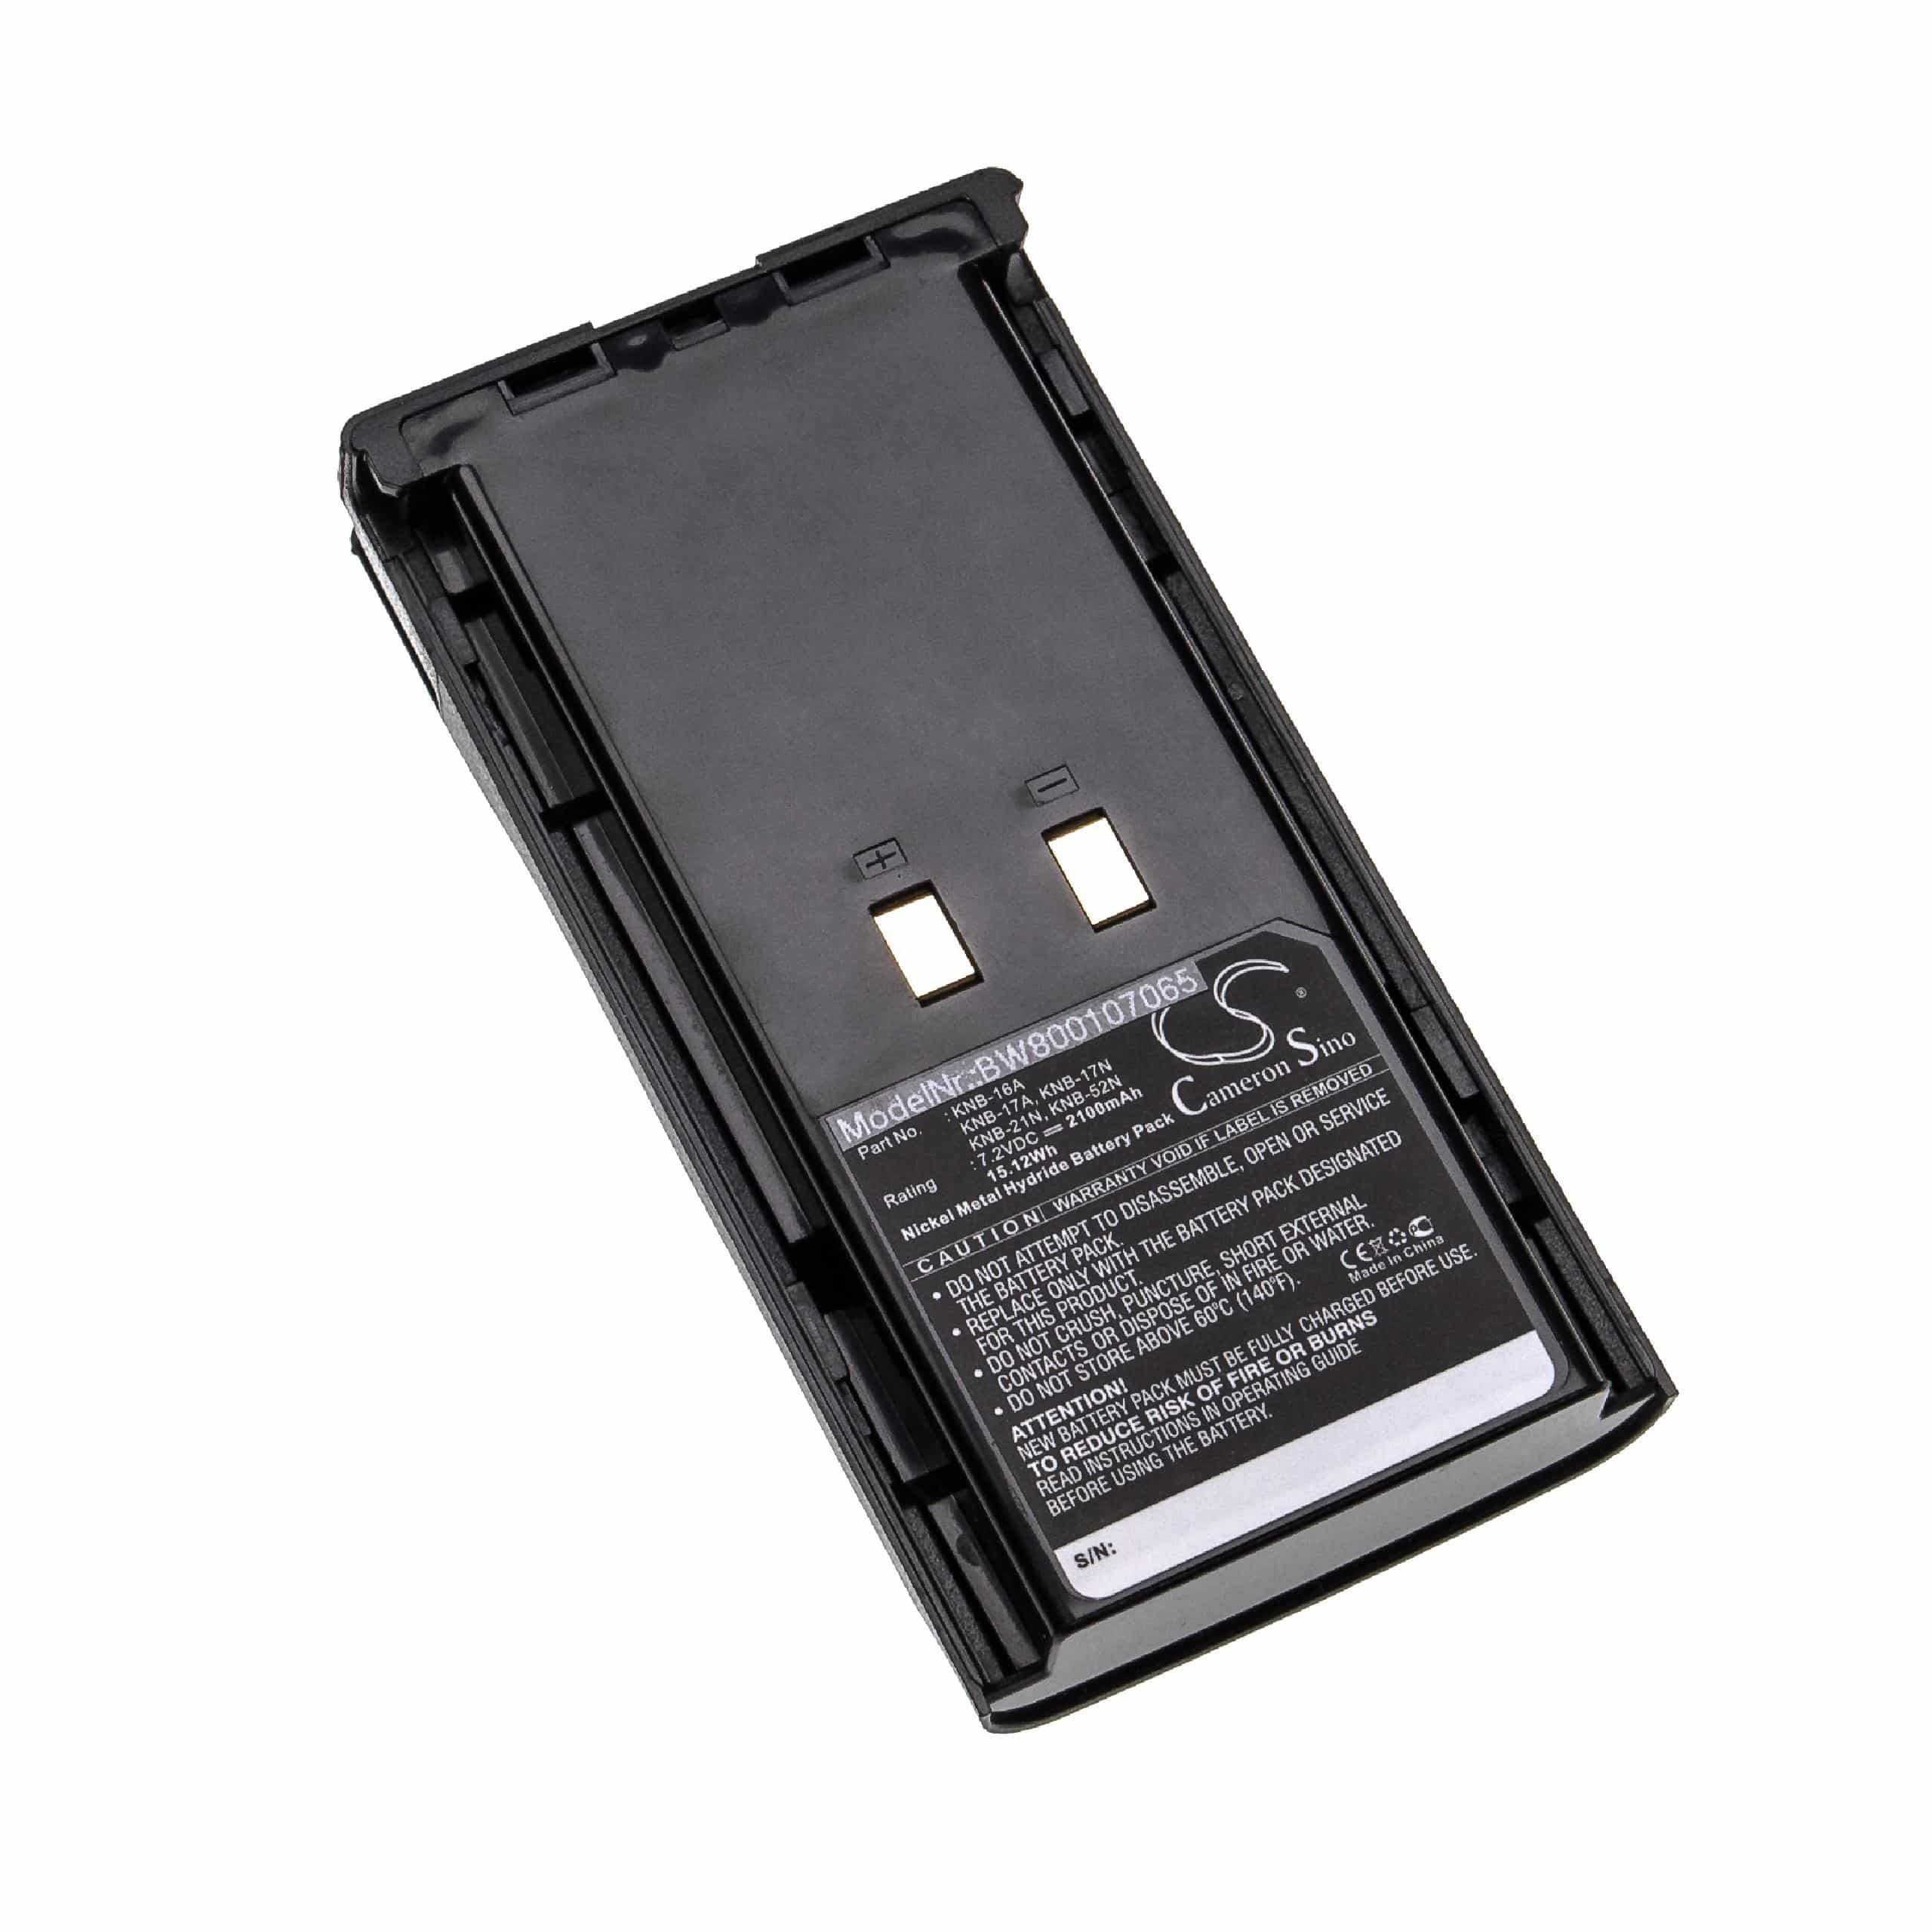 Radio Battery Replacement for Kenwood KNB-52N, KNB-22N, KNB-21N, KNB-17N, KNB-17A, KNB-16A - 2100mAh 7.2V NiMH